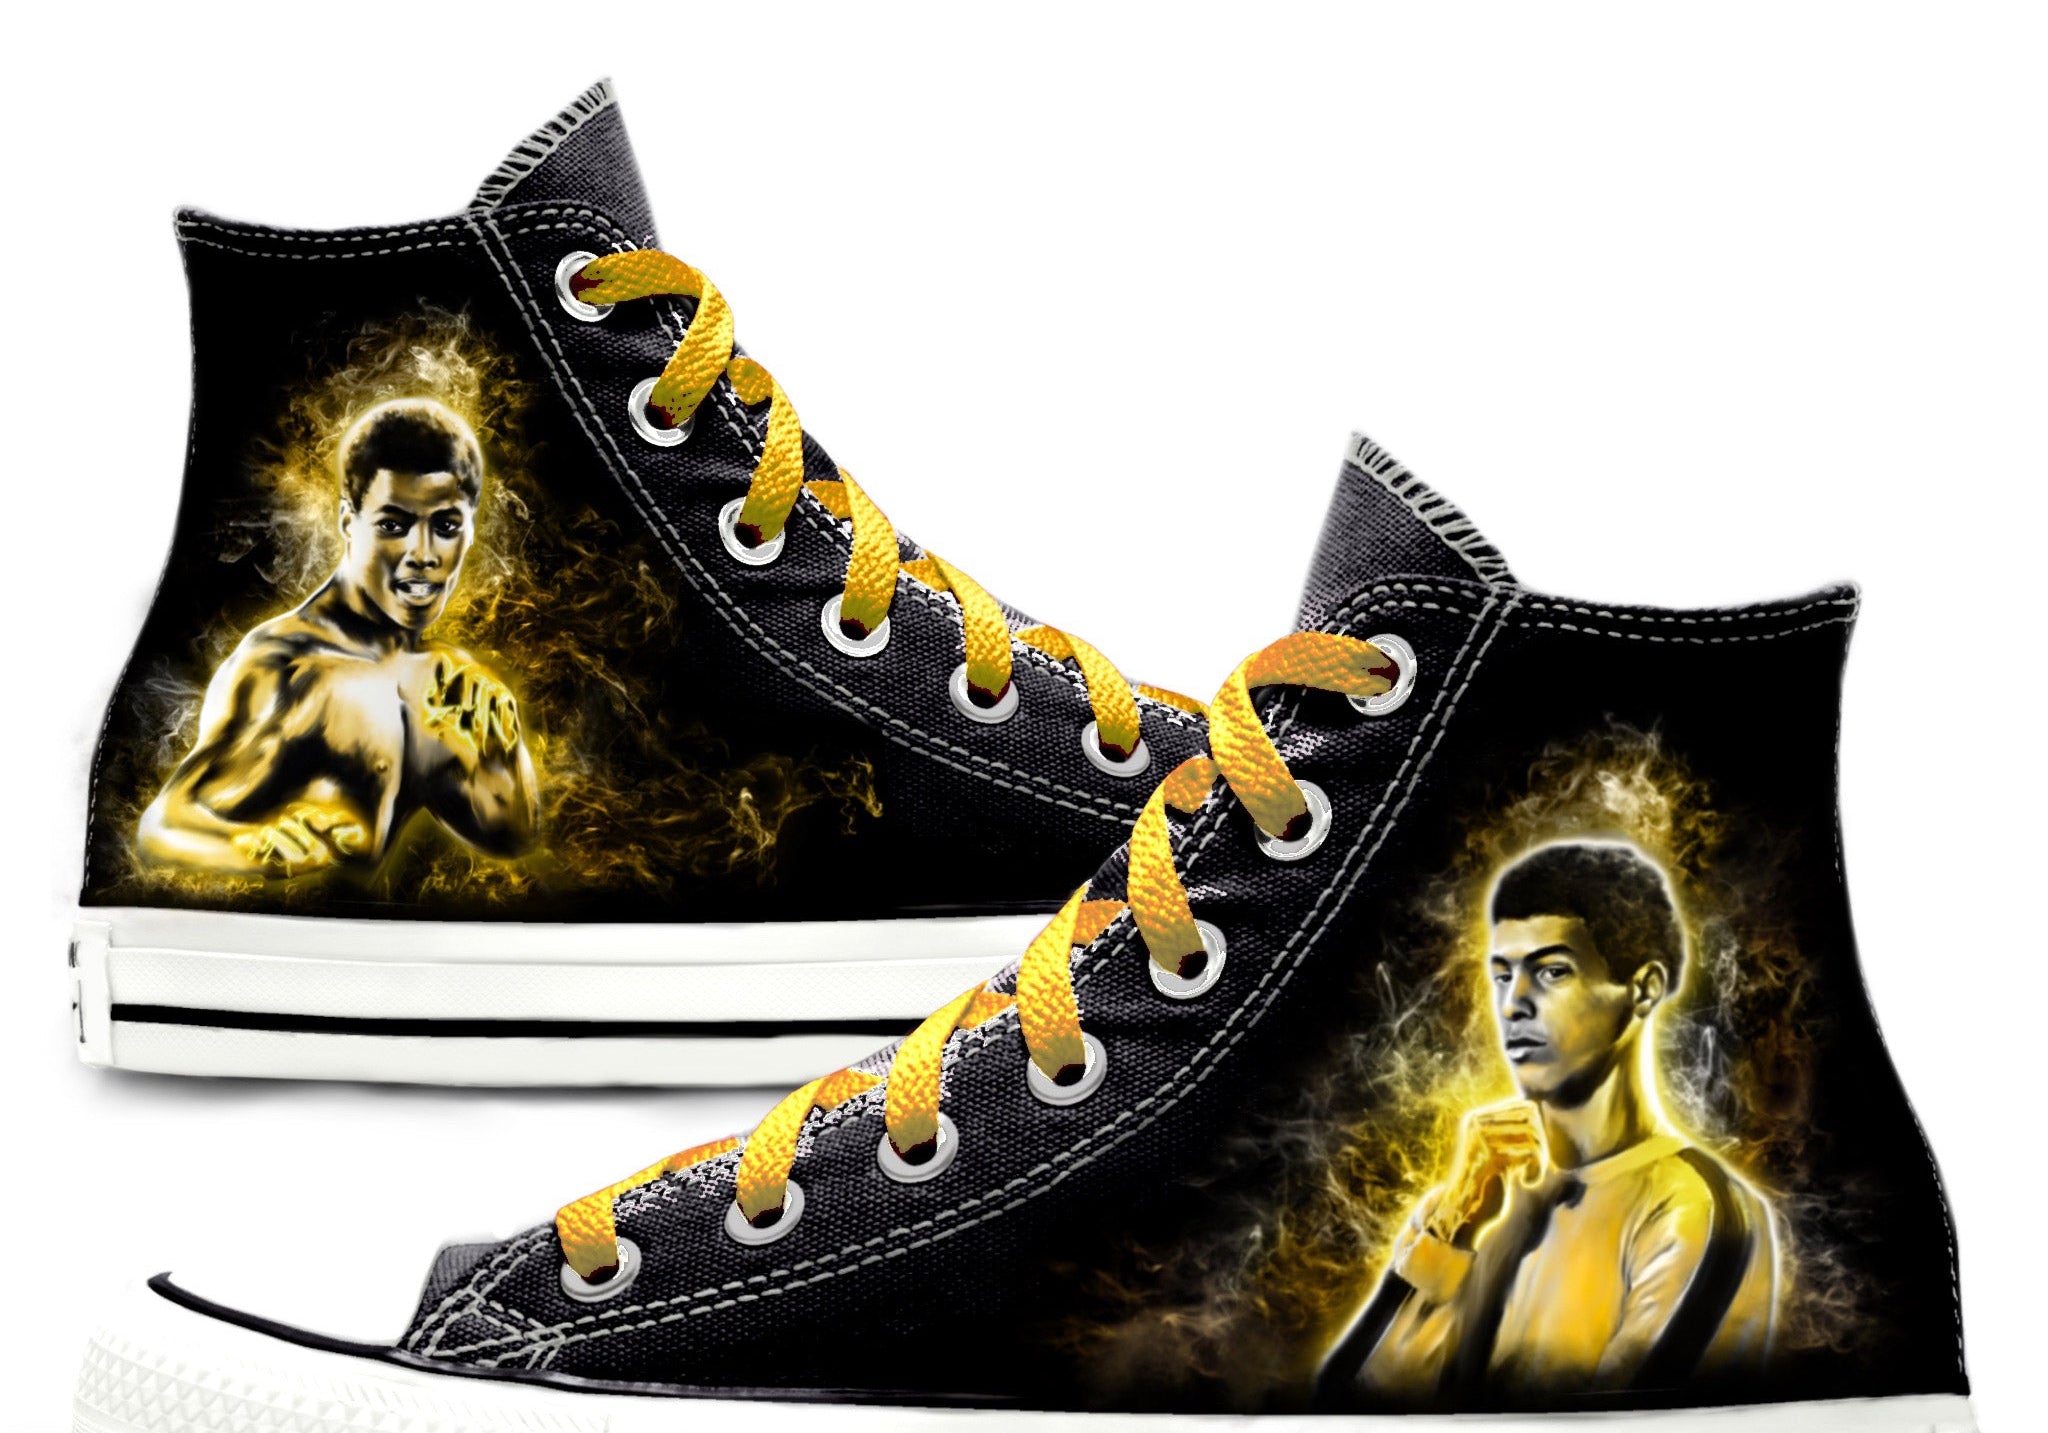 Bruce Leroy "The Glow" | Converse - Androo's Art